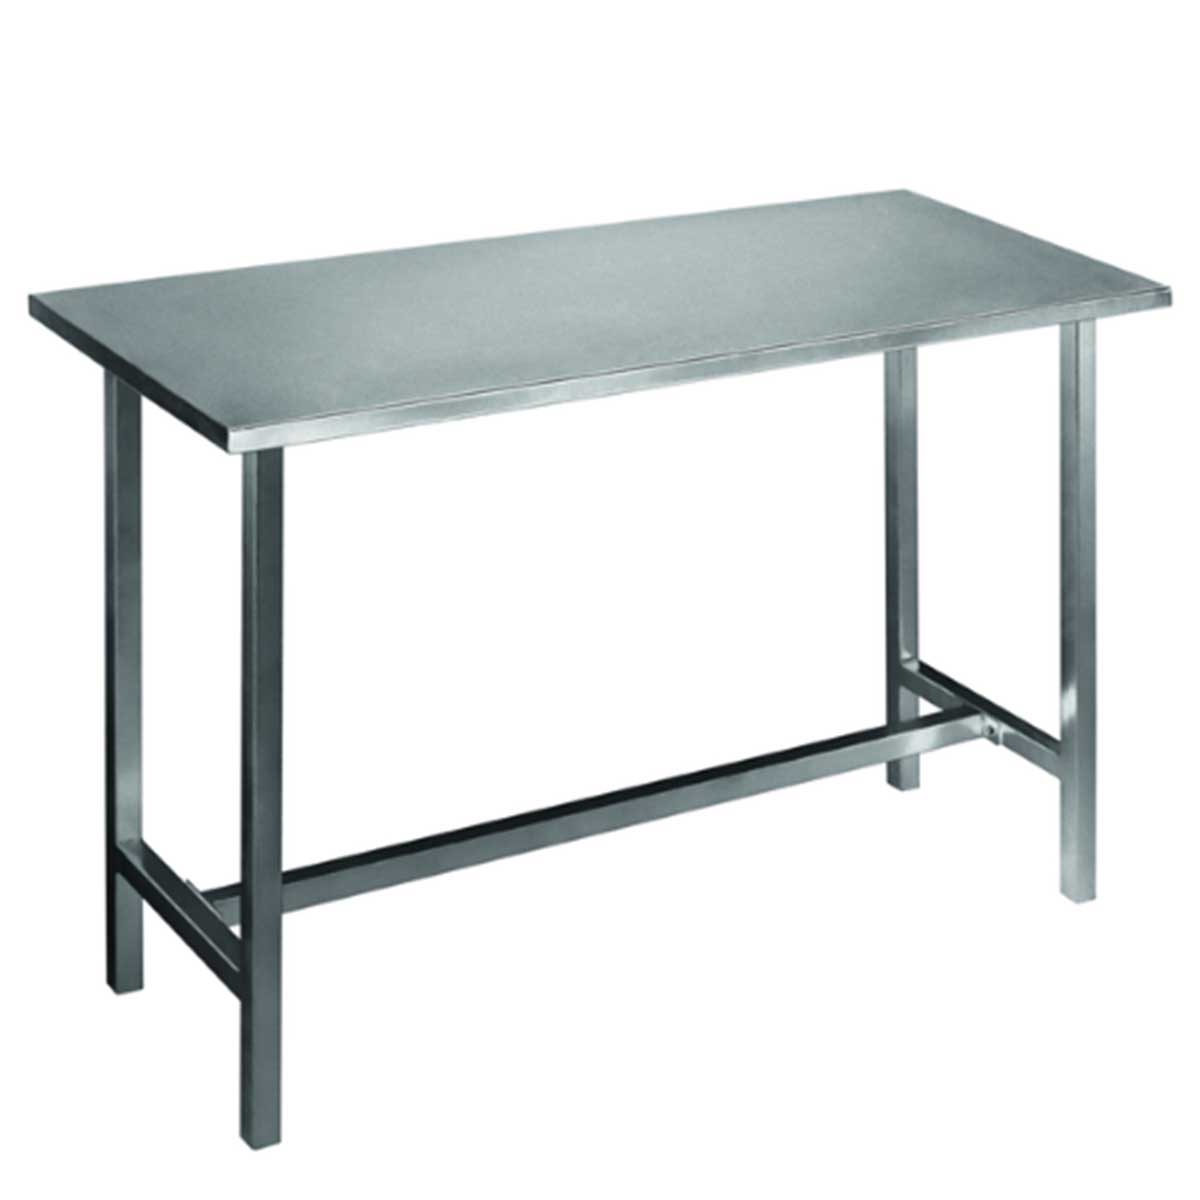 Metal Office Table Manufacturers, Suppliers in Dwarka Sector 27